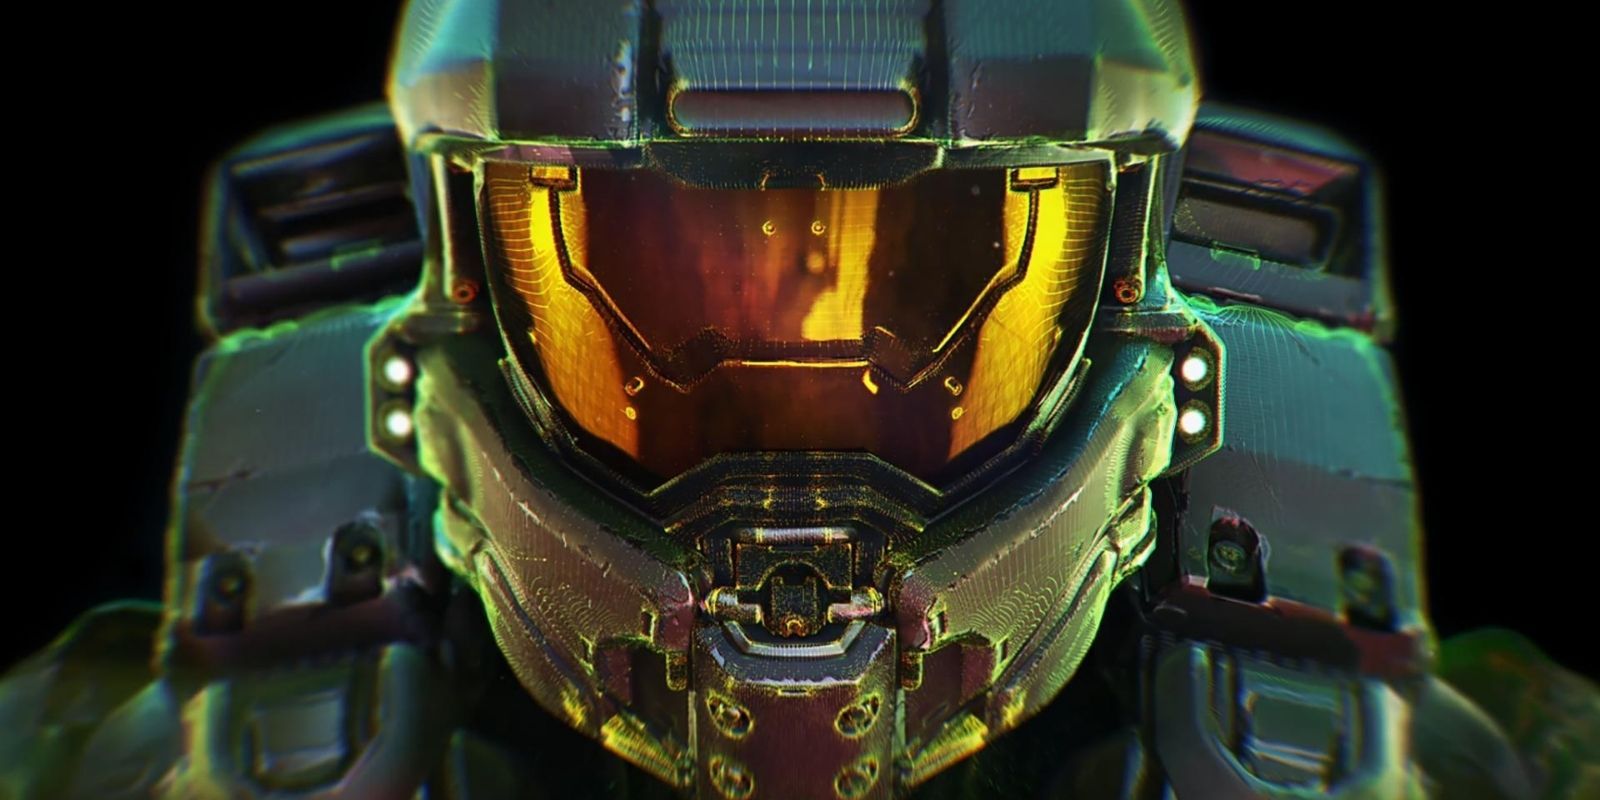 Halo' Live-Action Paramount+ Series Receives First Teaser Trailer